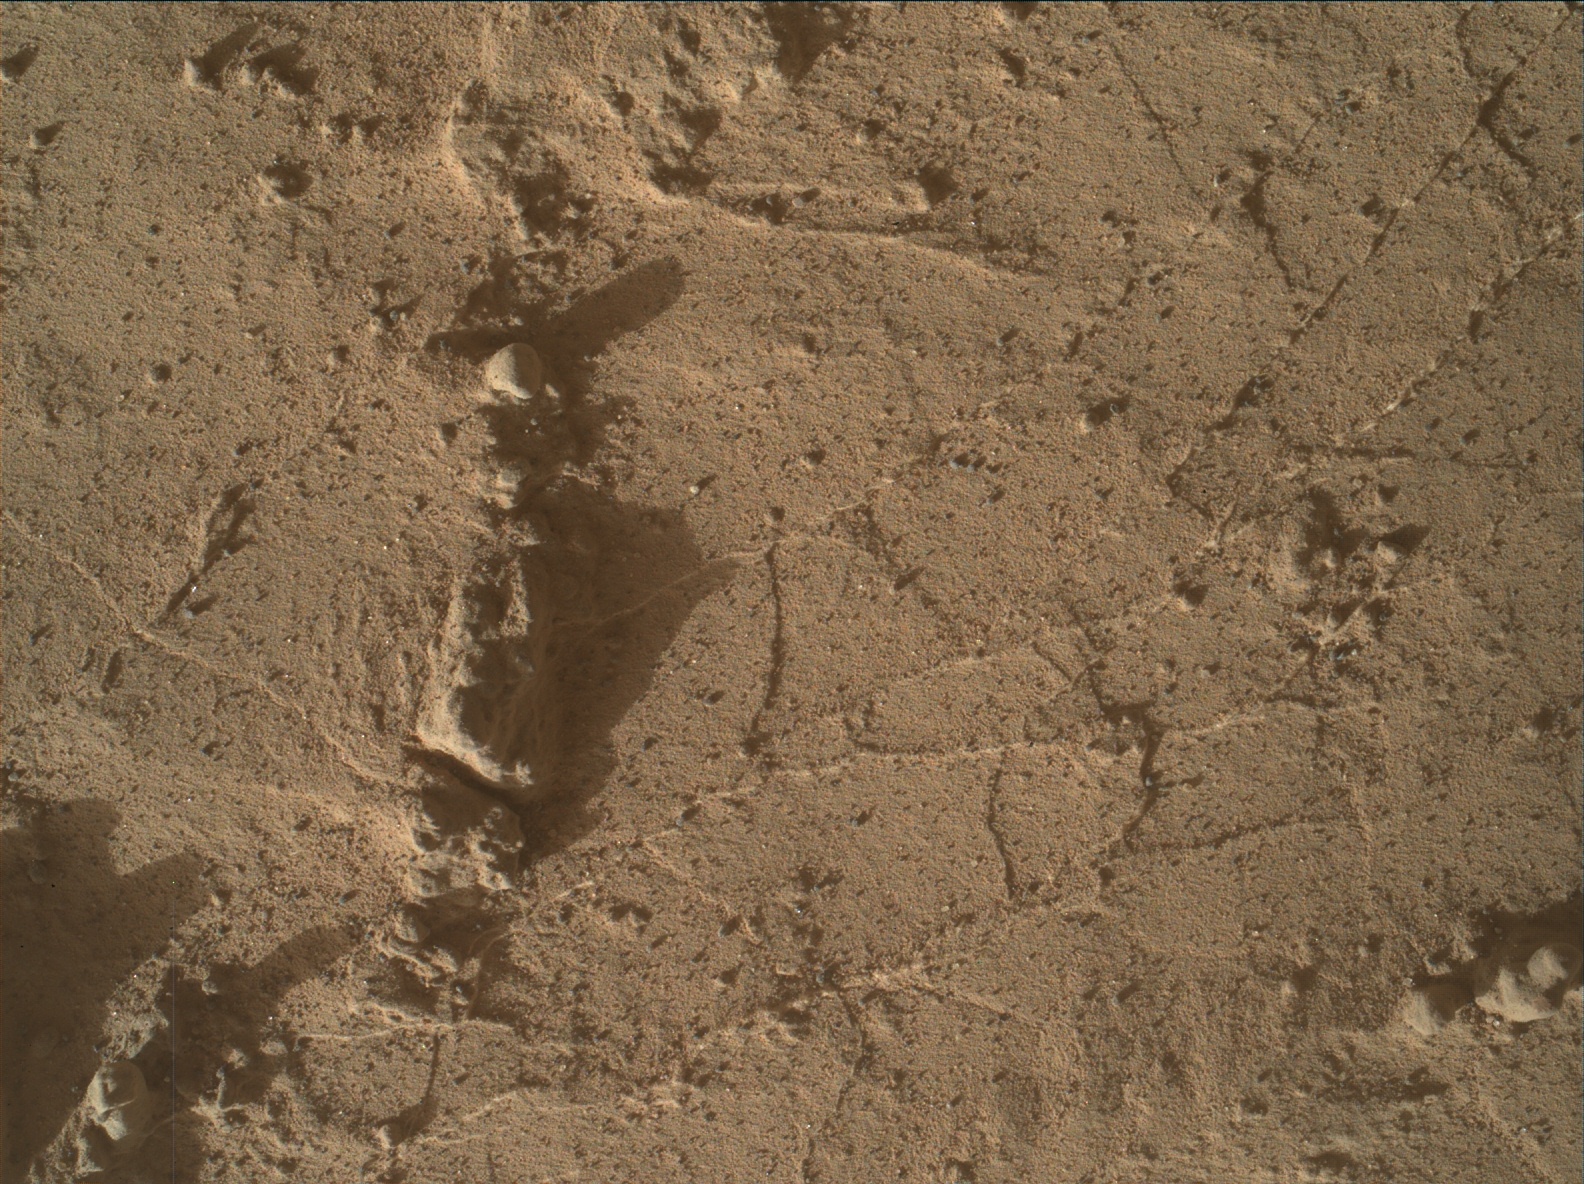 Nasa's Mars rover Curiosity acquired this image using its Mars Hand Lens Imager (MAHLI) on Sol 3140